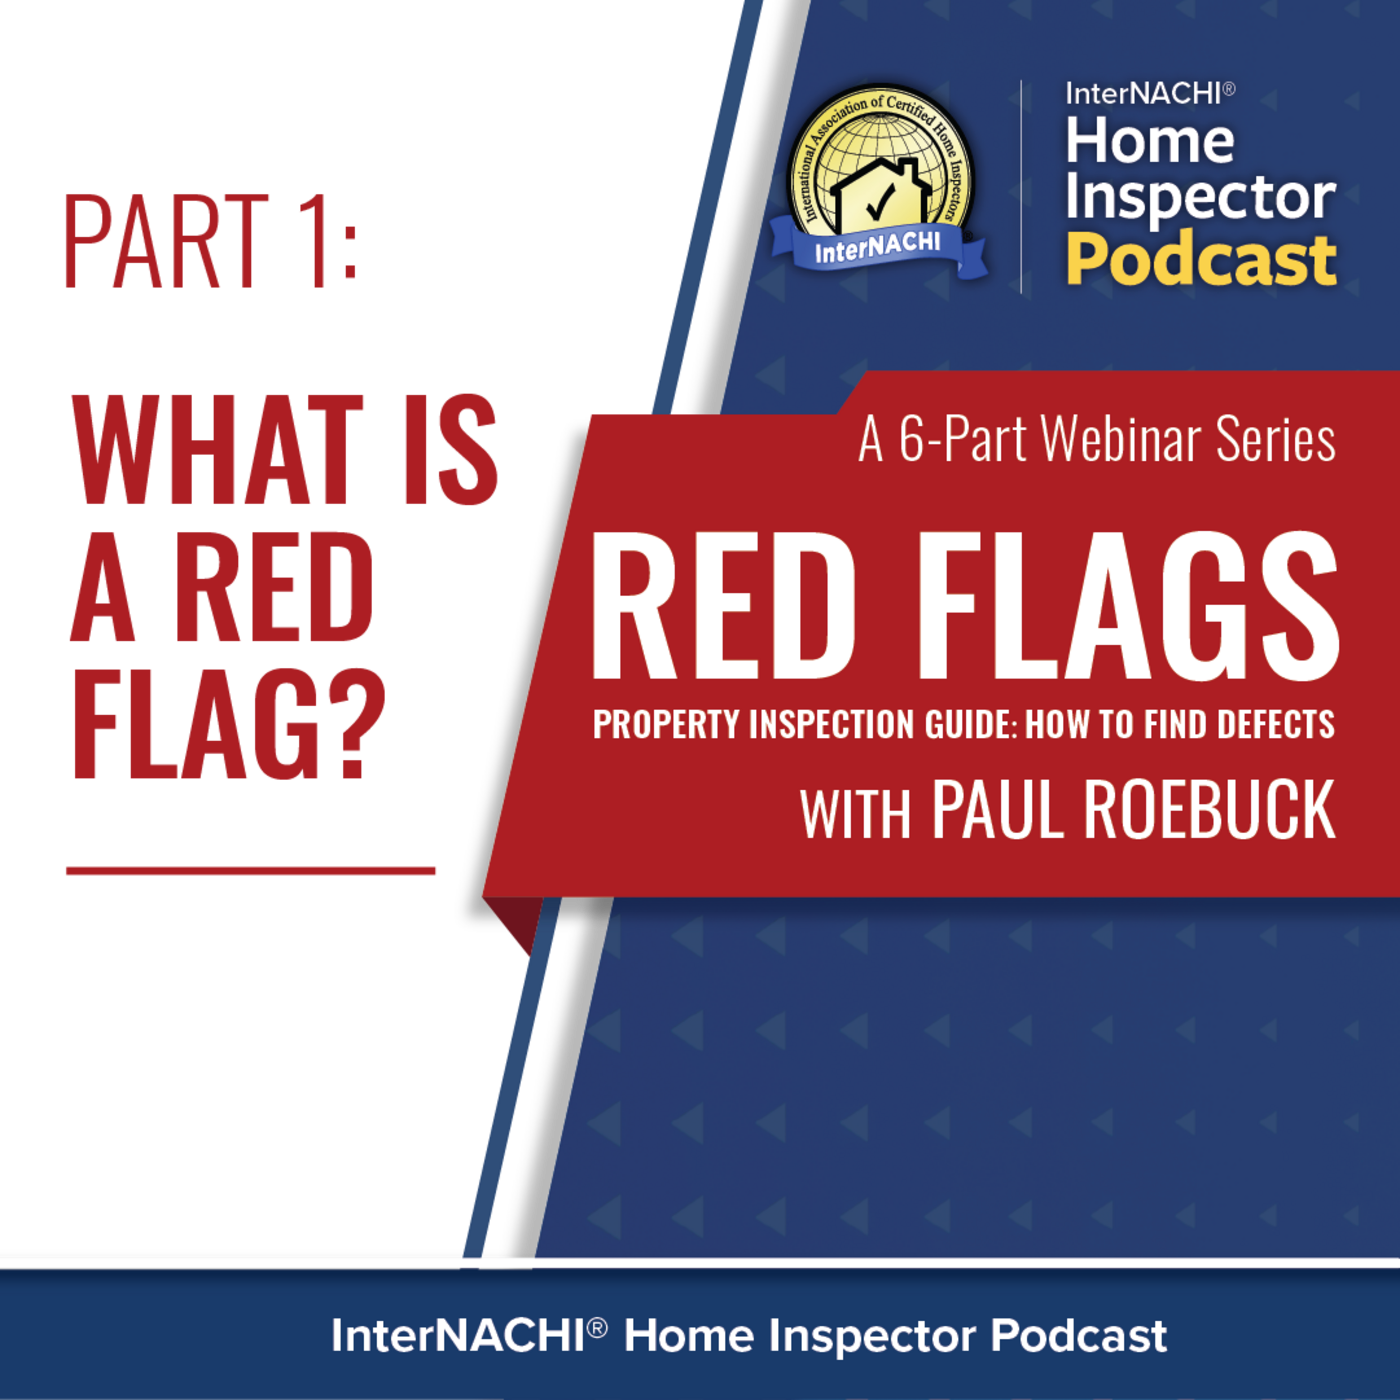 Episode 575: Red Flags Property Inspection Guide: What Is a Red Flag?